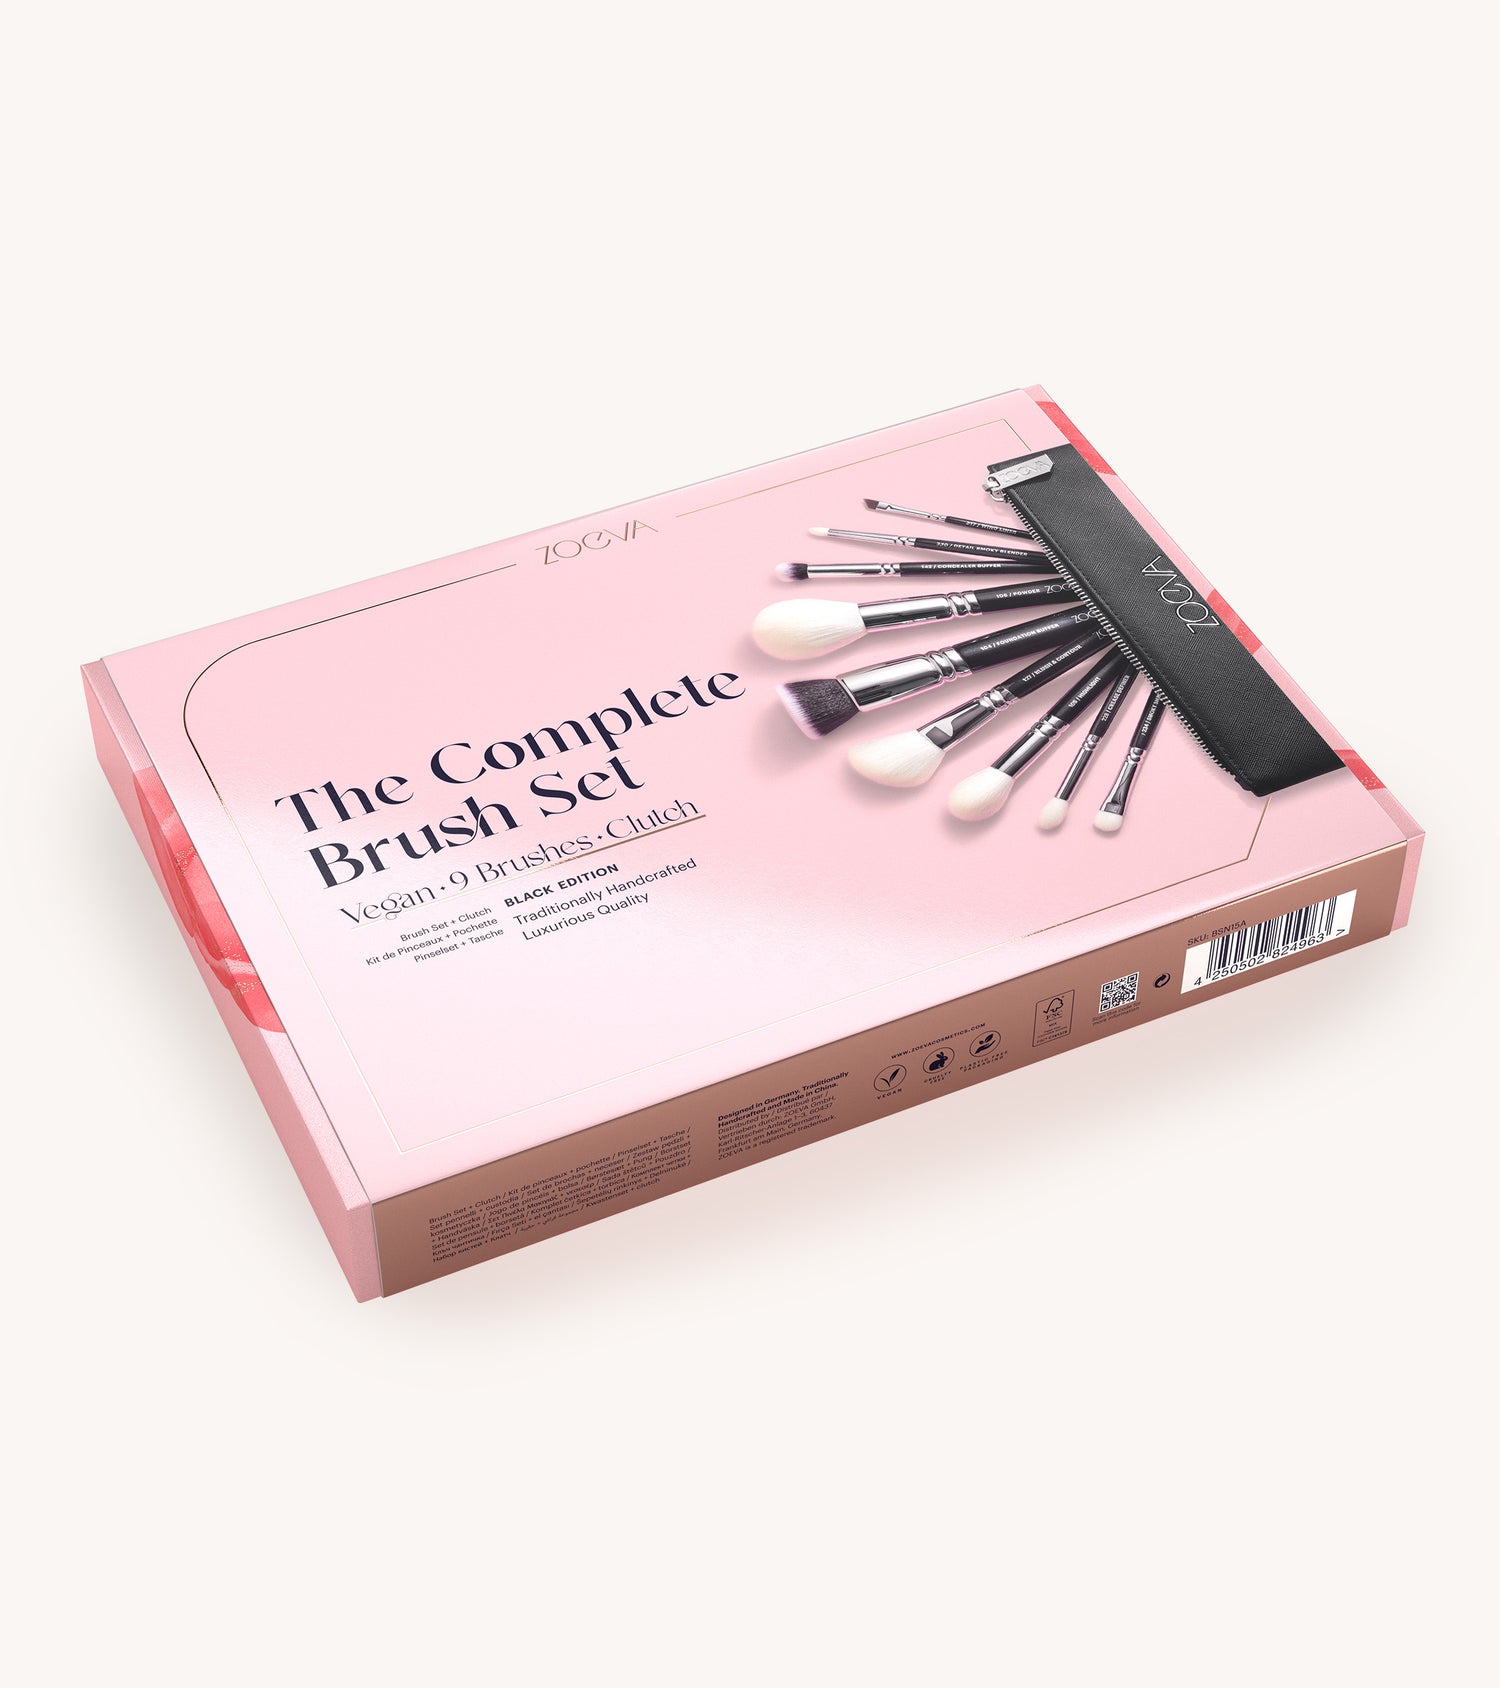 The Complete Brush Set (Black) Main Image featured